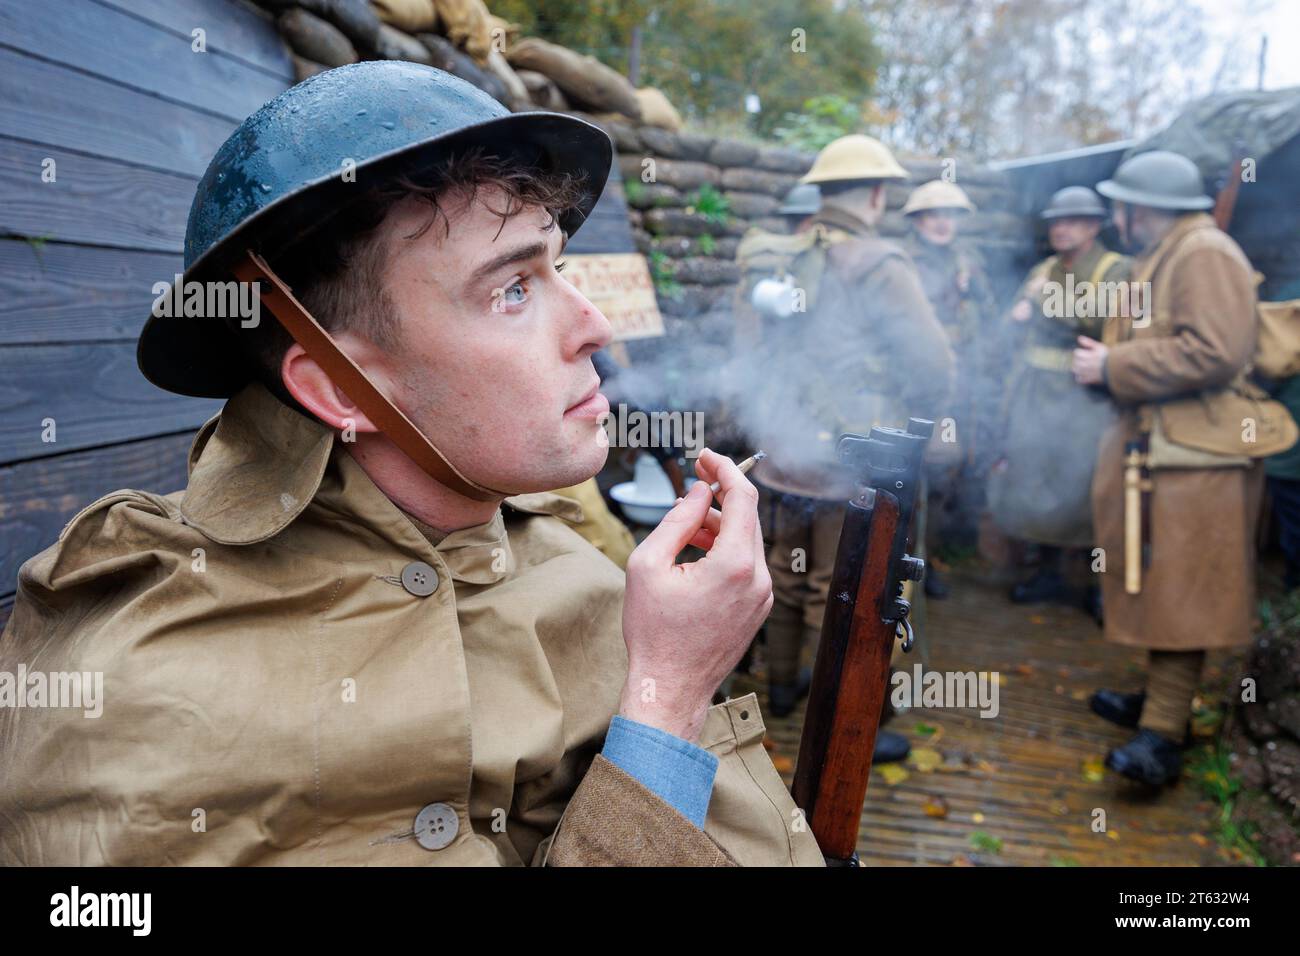 The Staffordshire Regiment Museum have built Trenches modelled on the real ones used in World War to give visitors an experience of what life was like for soldiers in the trenches. The museum holds events using reenactors to create the mood and bring to life history from the period. Pictured, Isaac Marlow (27)  from the Birmingham Pals troop lights a roll up cigarette in one of the trenches. Stock Photo